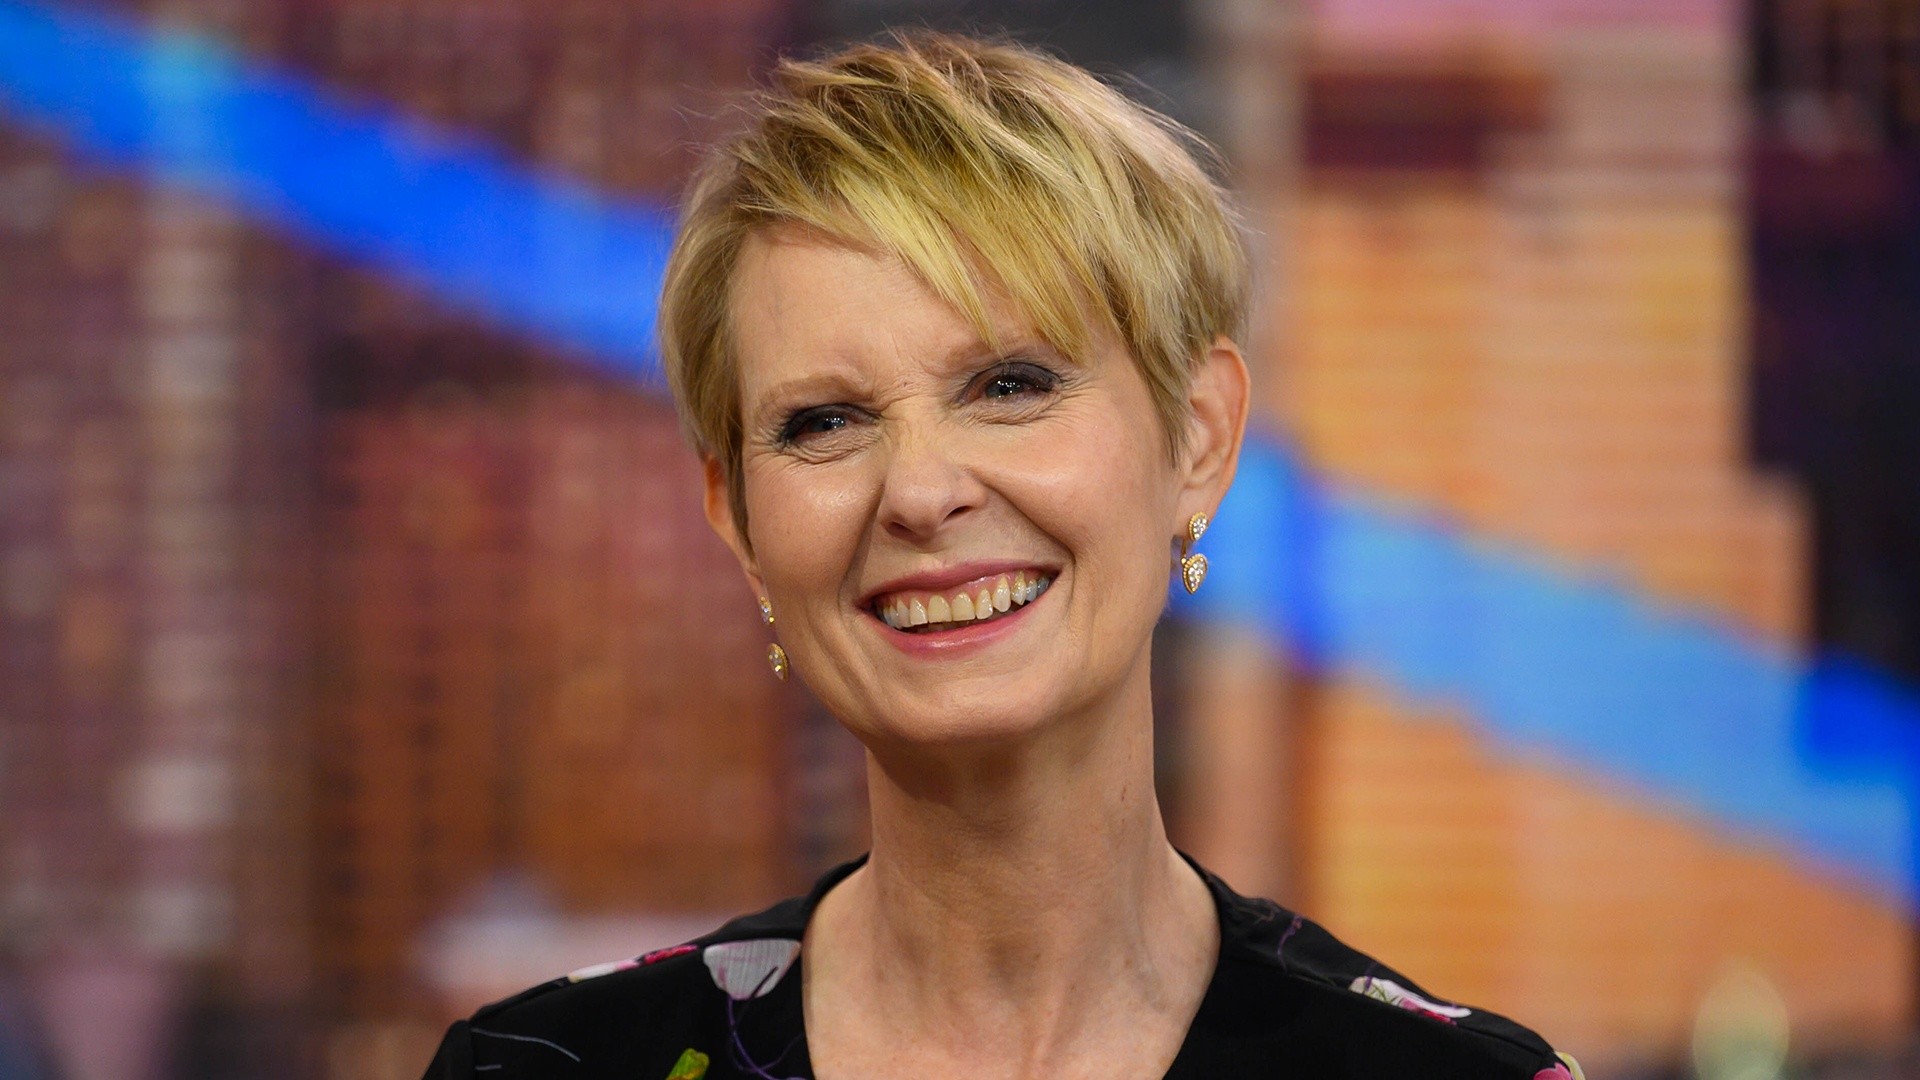 Cynthia Nixon talks about her role in Sex and the City sequel